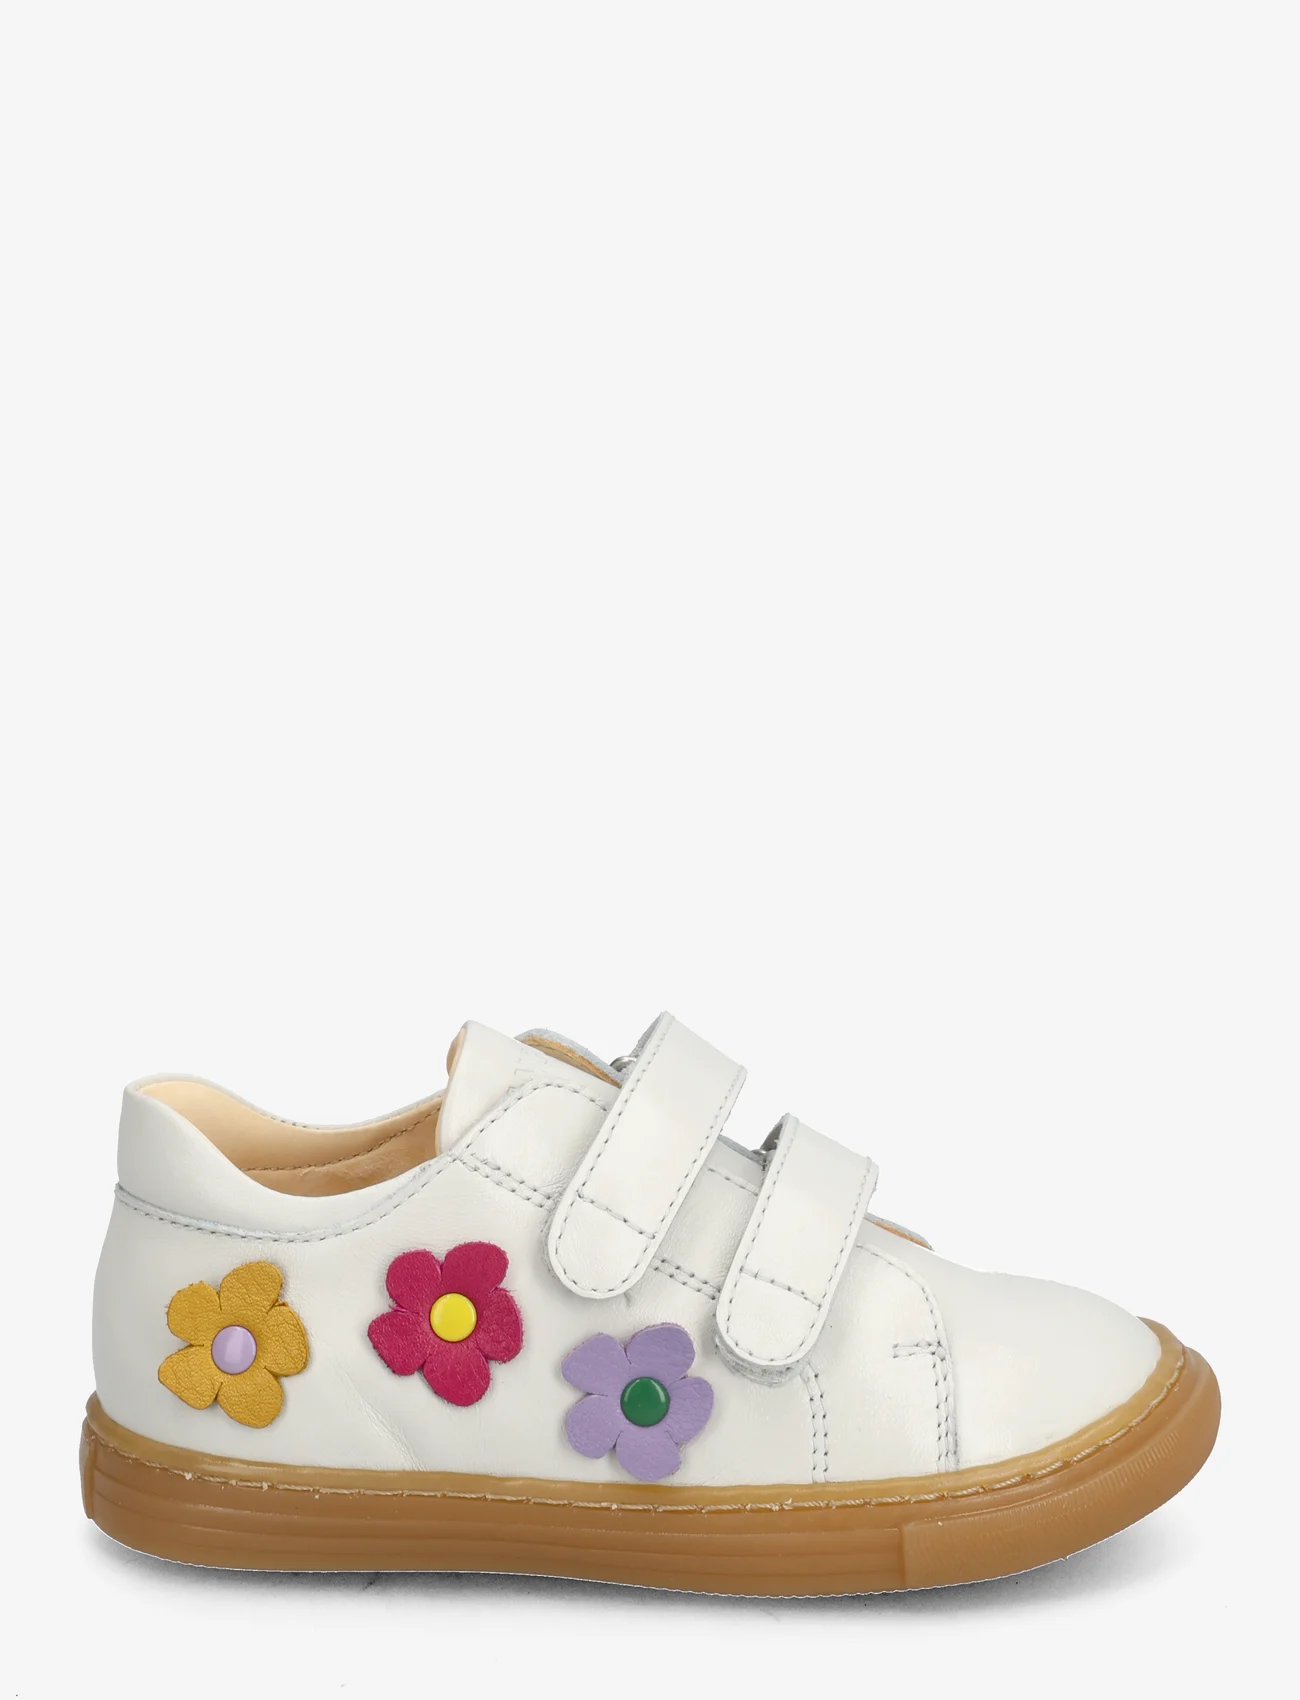 ANGULUS - Shoes - flat - with velcro - summer savings - 1493/a001 off white/flowers - 1